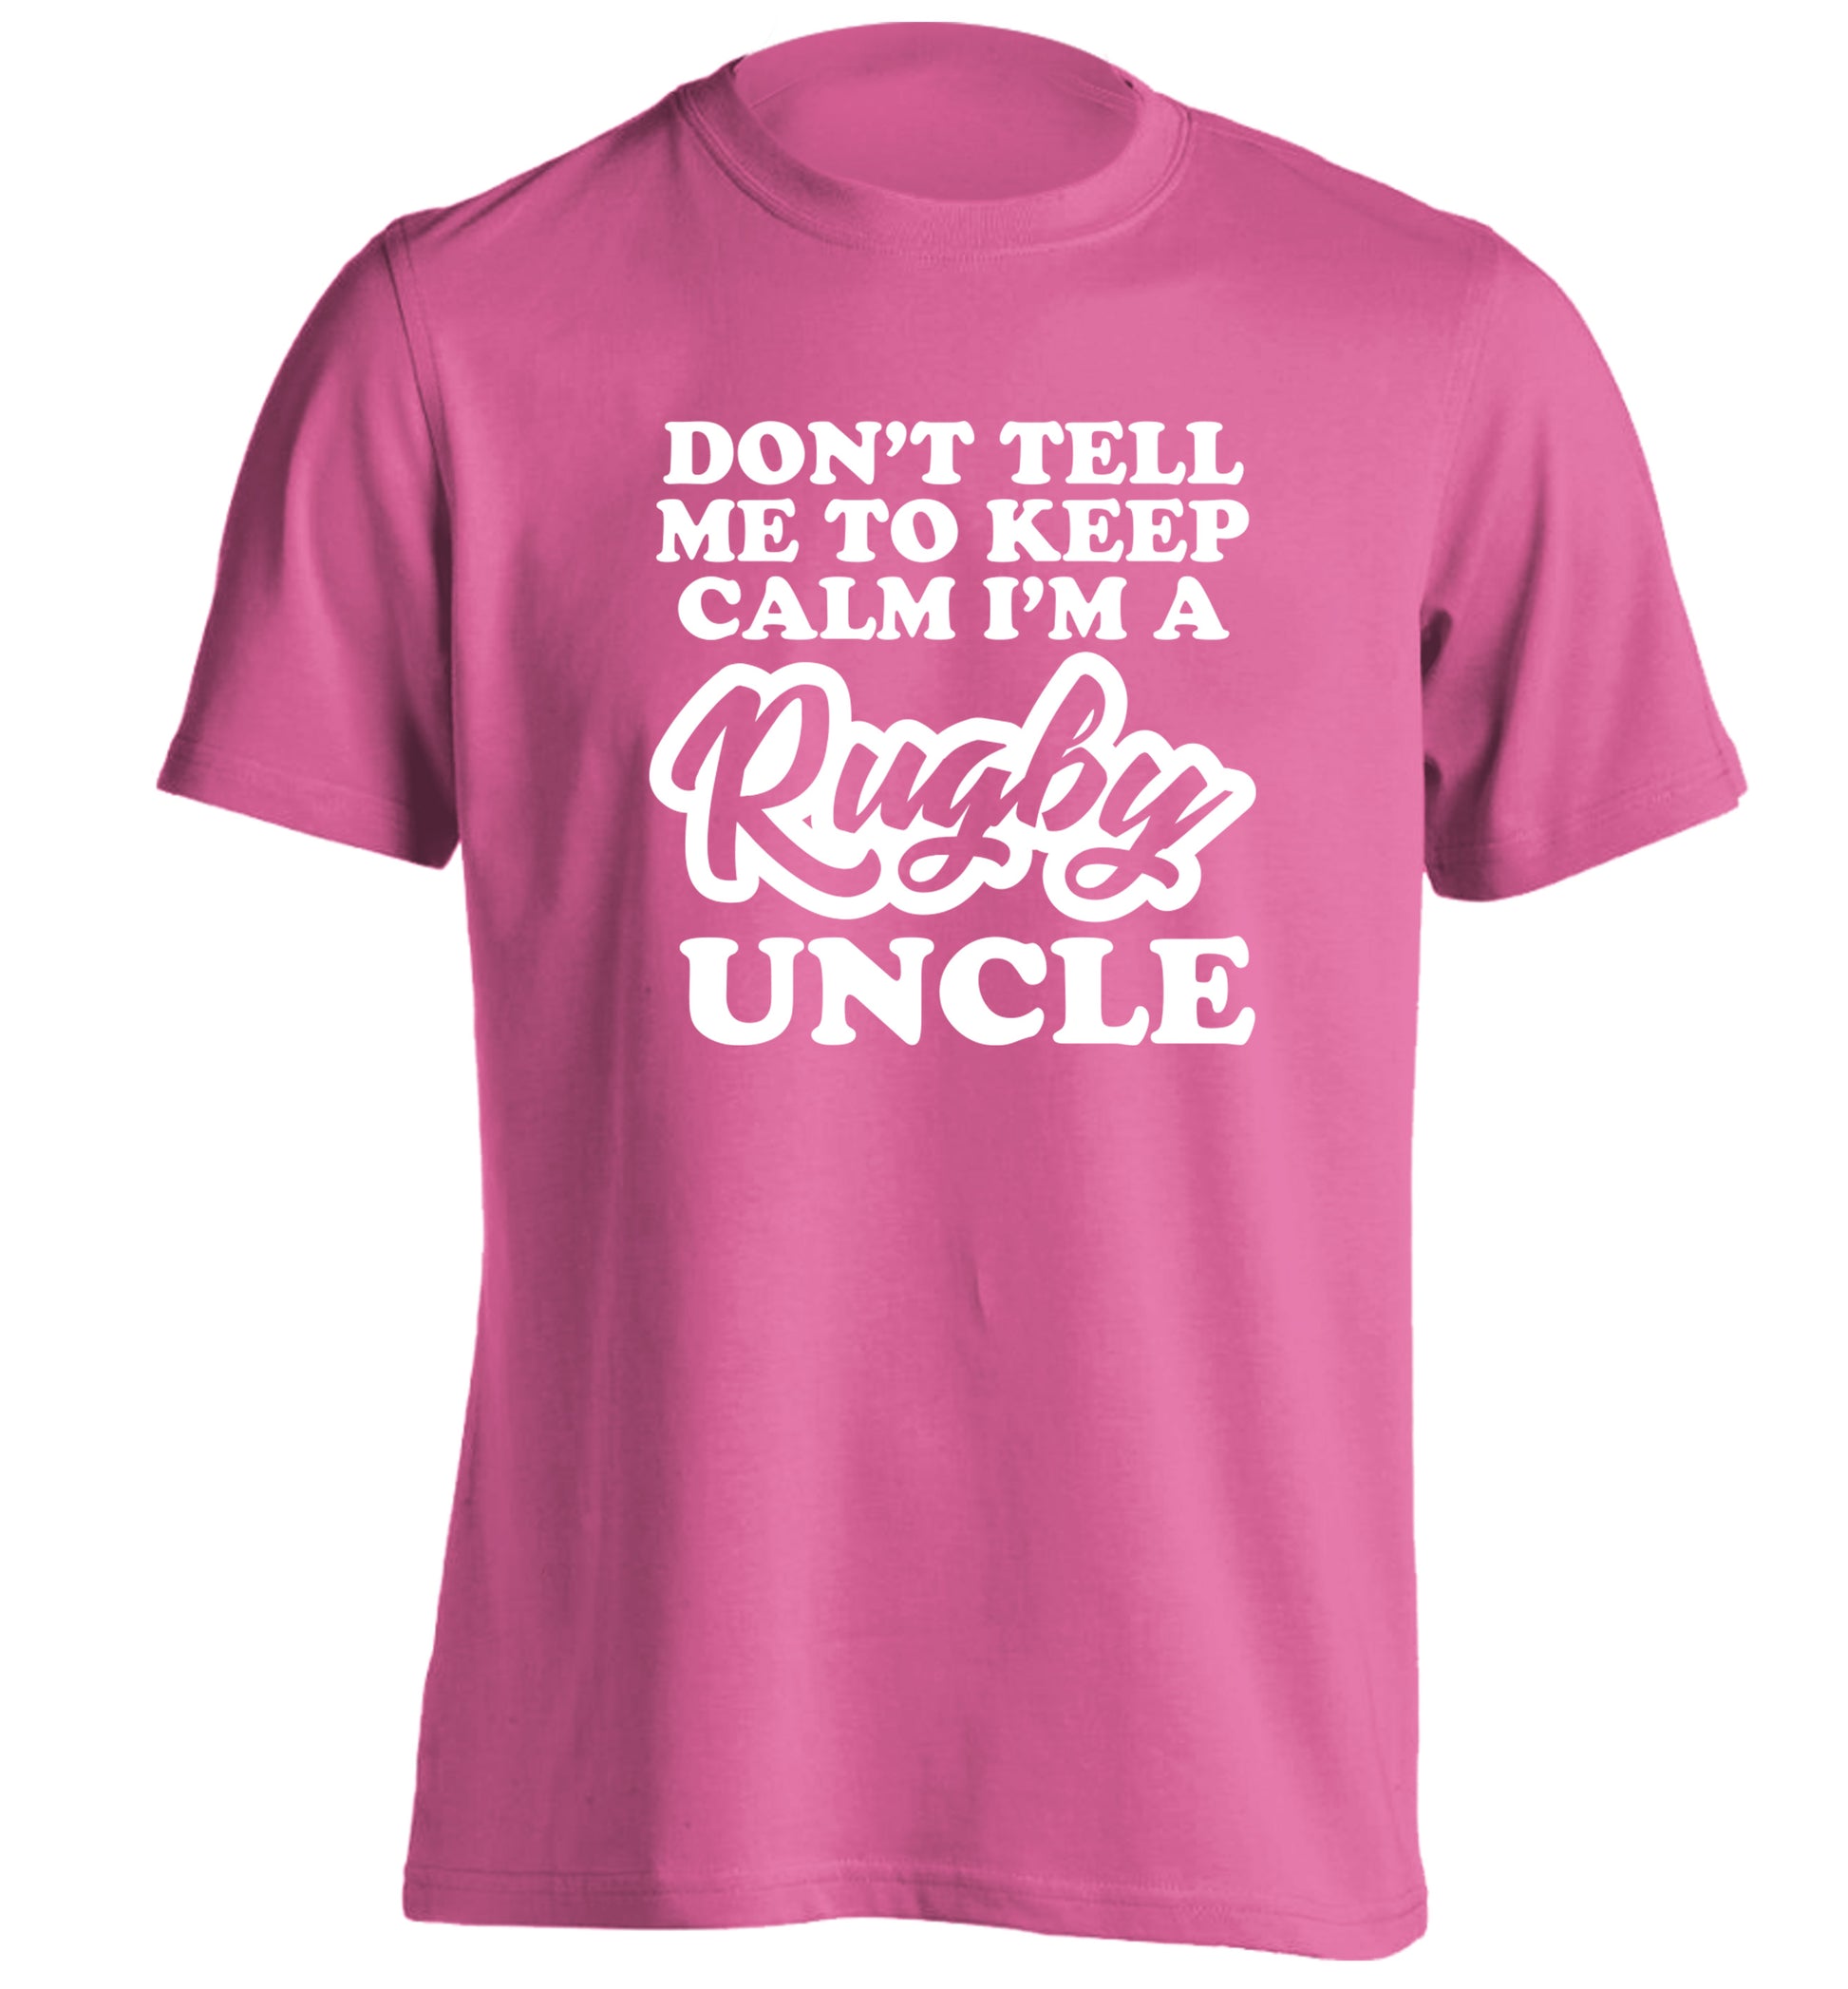 Don't tell me to keep calm I'm a rugby uncle adults unisex pink Tshirt 2XL